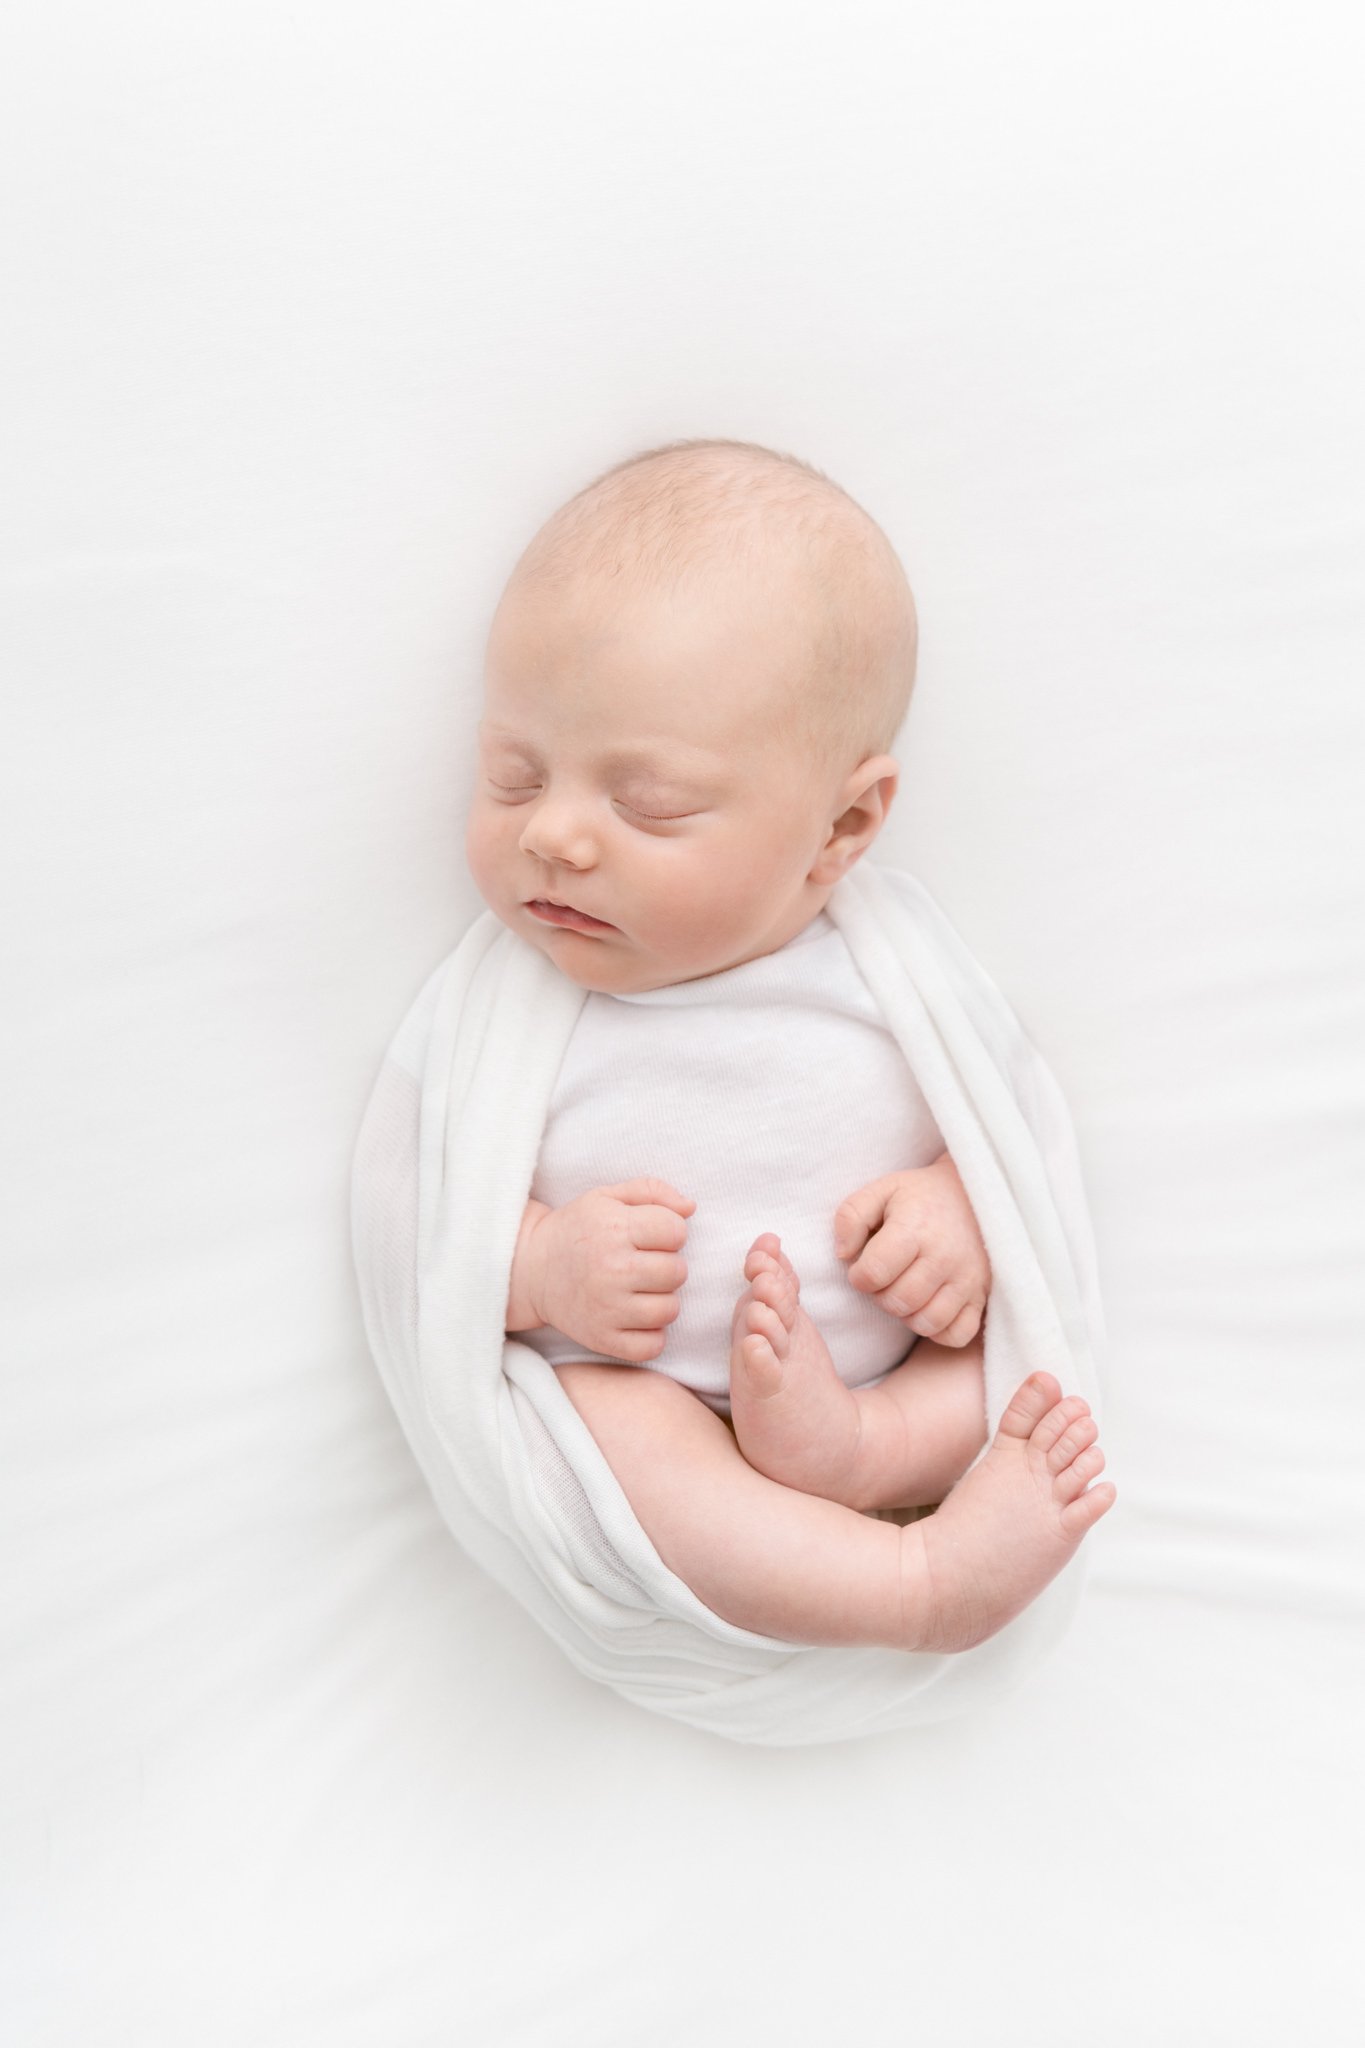  New Jersey studio newborn session with a swaddled sleeping baby girl by Nicole Hawkins Photography. bald baby portrait sleeping swaddle for newborns to show off legs #NicoleHawkinsPhotography #NicoleHawkinsNewborns #StudioNewborn #StudioFamily #East